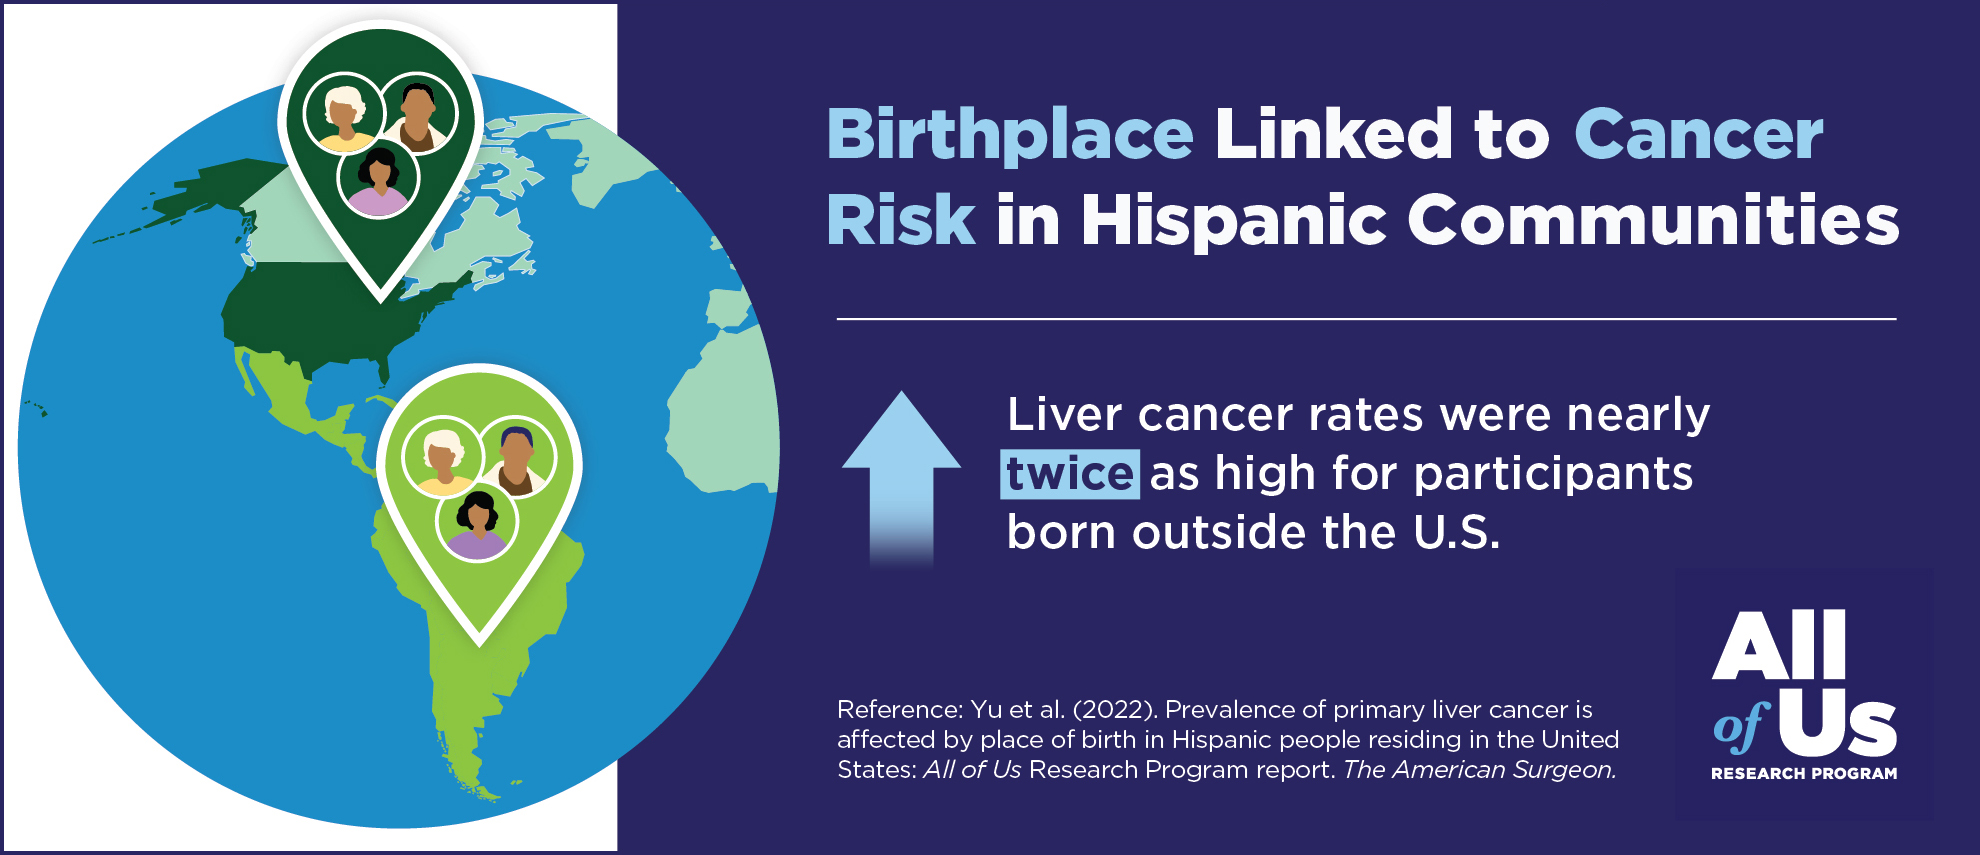 Birthplace linked to cancer risk in Hispanic communities. Liver cancer rates were nearly twice as high for participants born outside the U.S. Reference: Yu et al. (2022). Prevalence of primary liver cancer is affected by place of birth in Hispanic people residing in the United States: All of Us Research Program report. The American Surgeon. Logo of the All of Us Research Program. Illustration of a globe showing the Western Hemisphere with location pins in both North and South America.